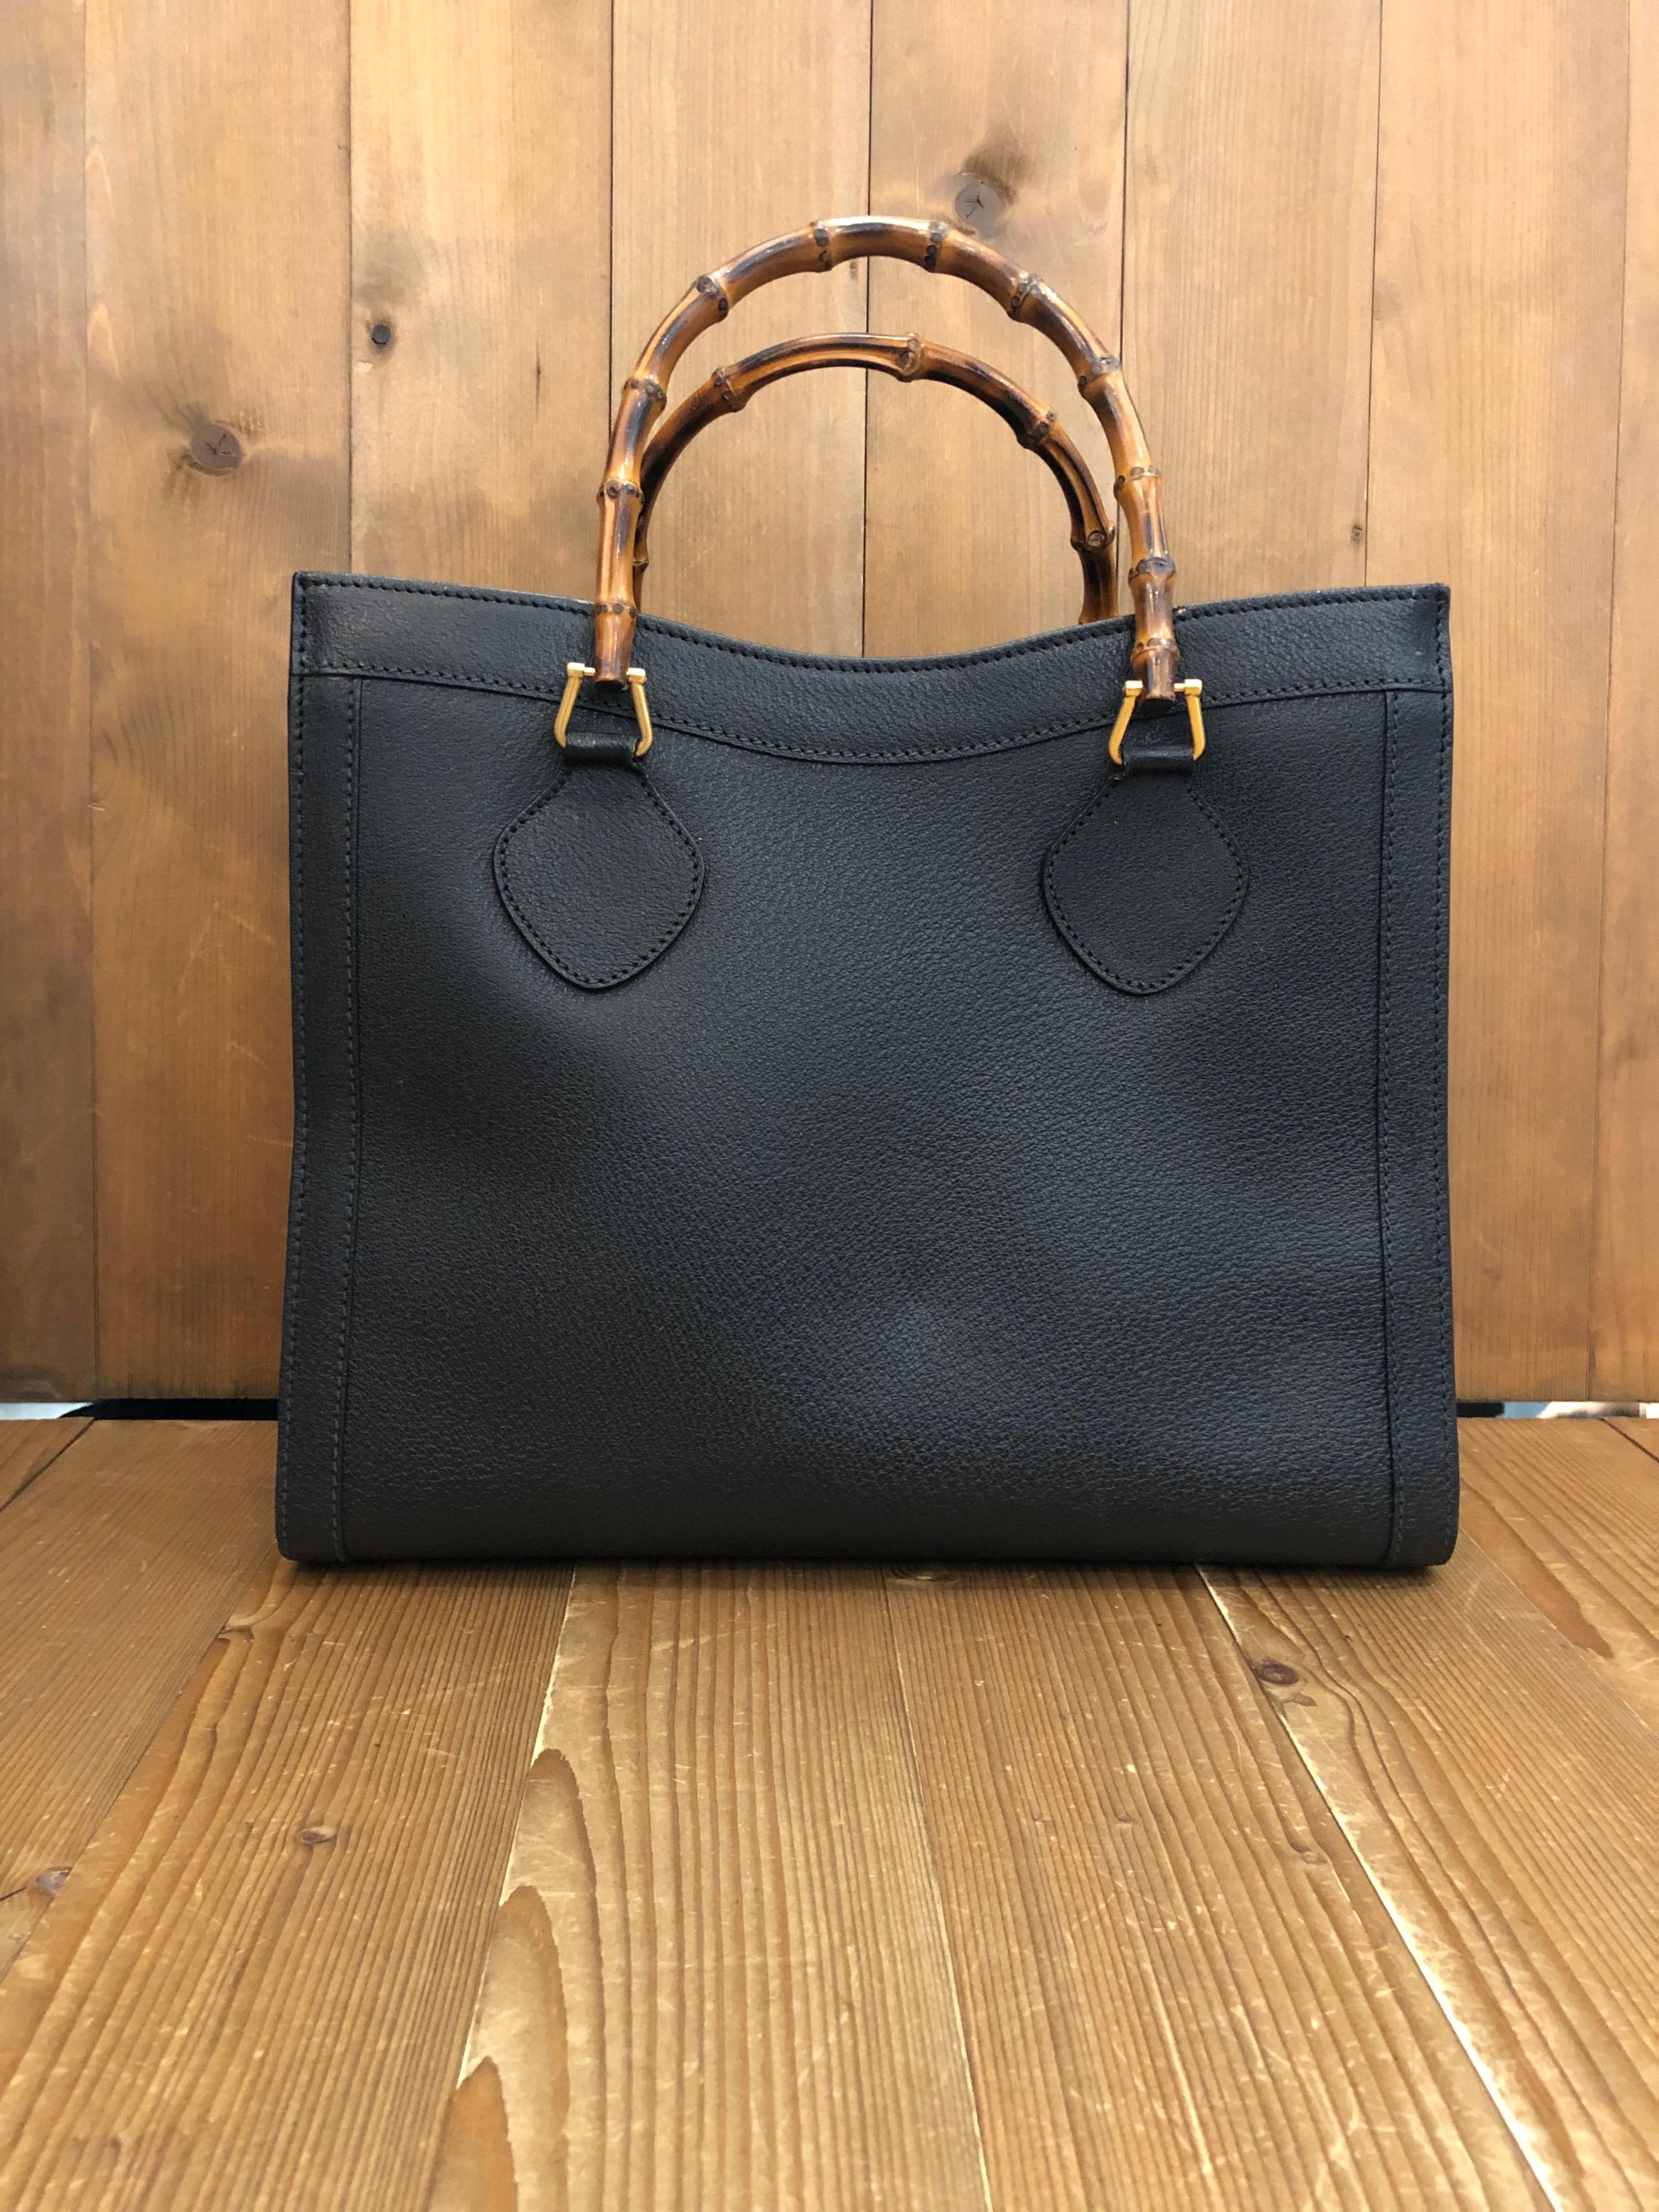 1990s Gucci bamboo tote in black leather. The Bamboo tote is one of Princess Diana's favorite purses. Gucci revamped this Bamboo tote in 2021 winter collection. Made in Italy. Measures 13 x 11 x 5.5 inches handle drop 5 inches. It features two main